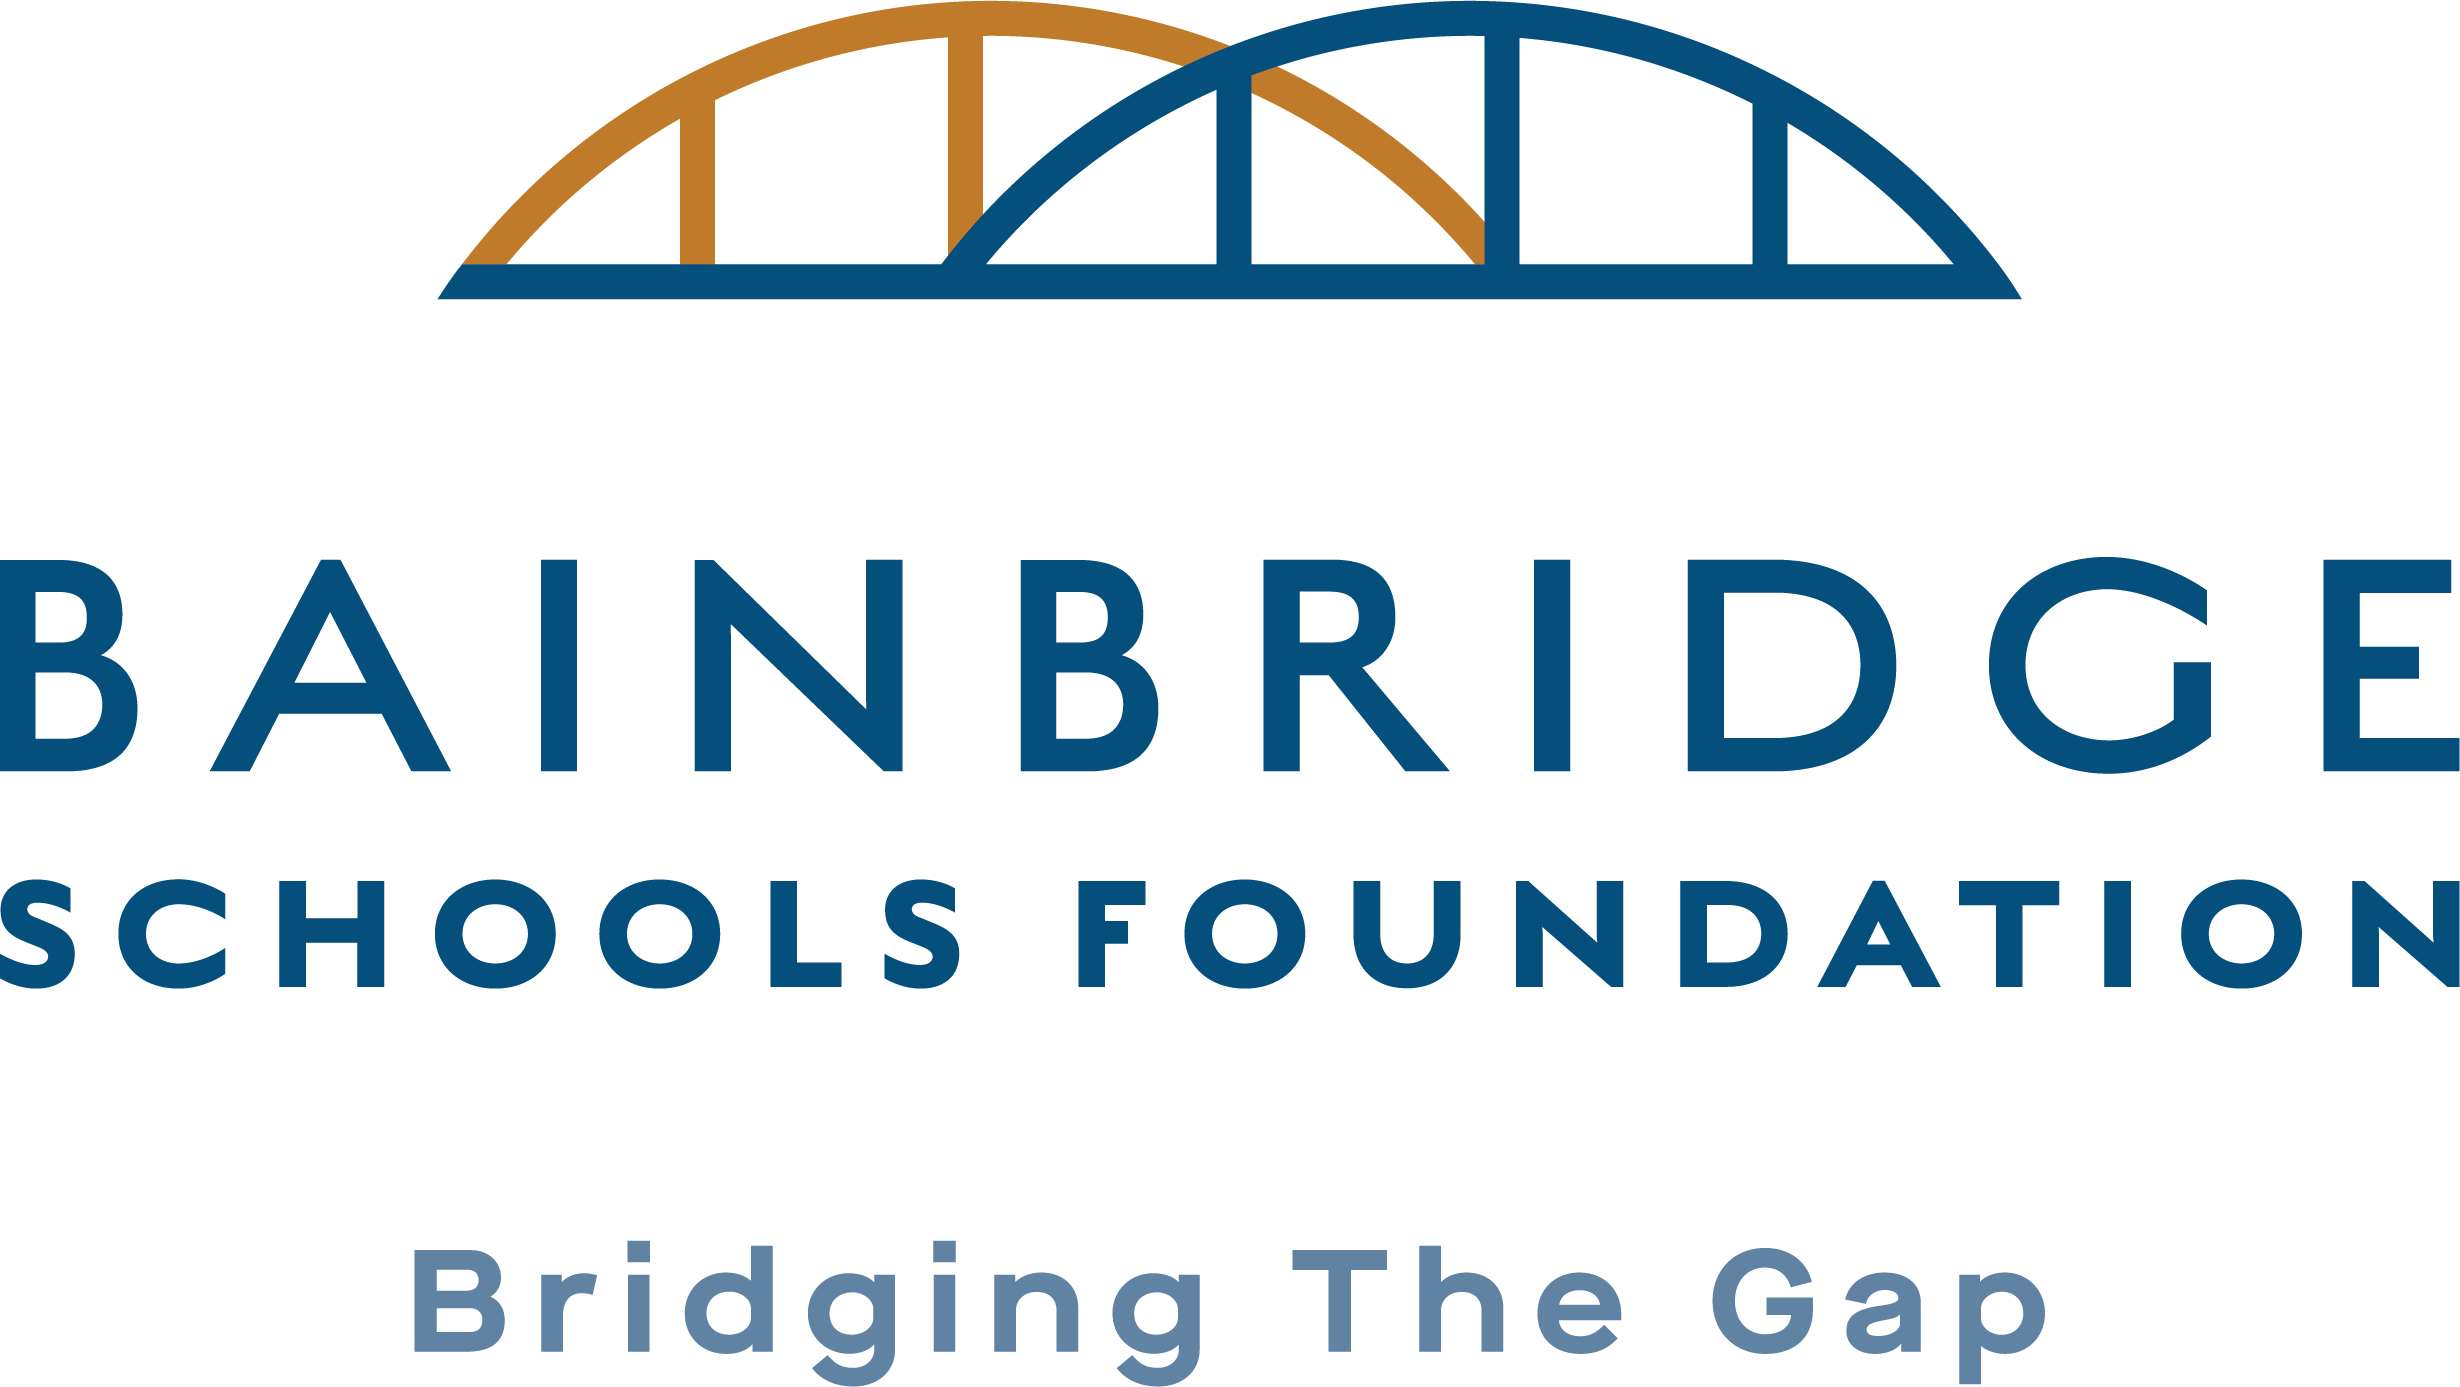 Support bainbridge schools foundation during their fall fundraising campaign